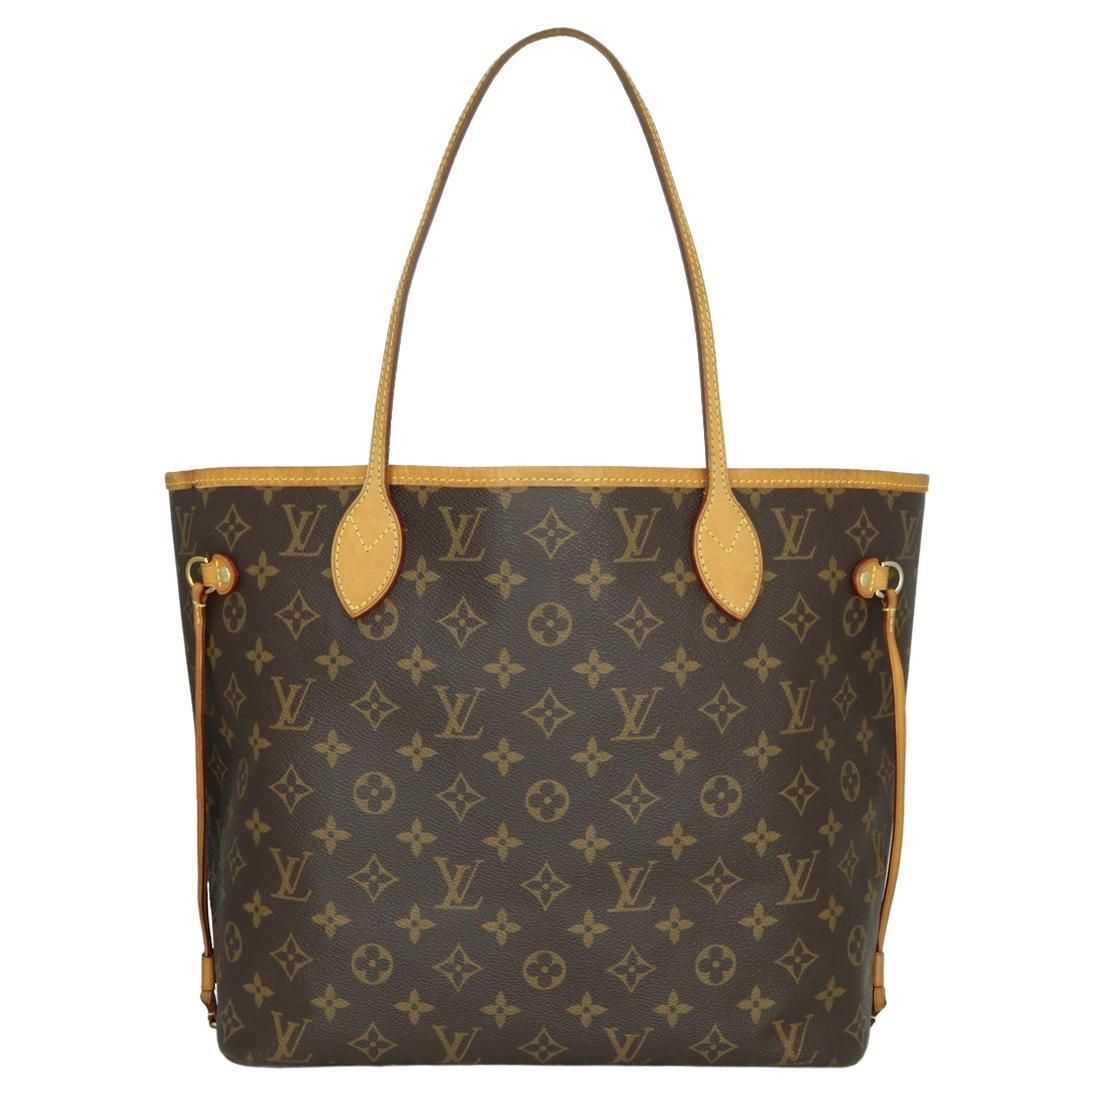 Louis Vuitton Neverfull MM Bag in Monogram with Beige Interior 2017